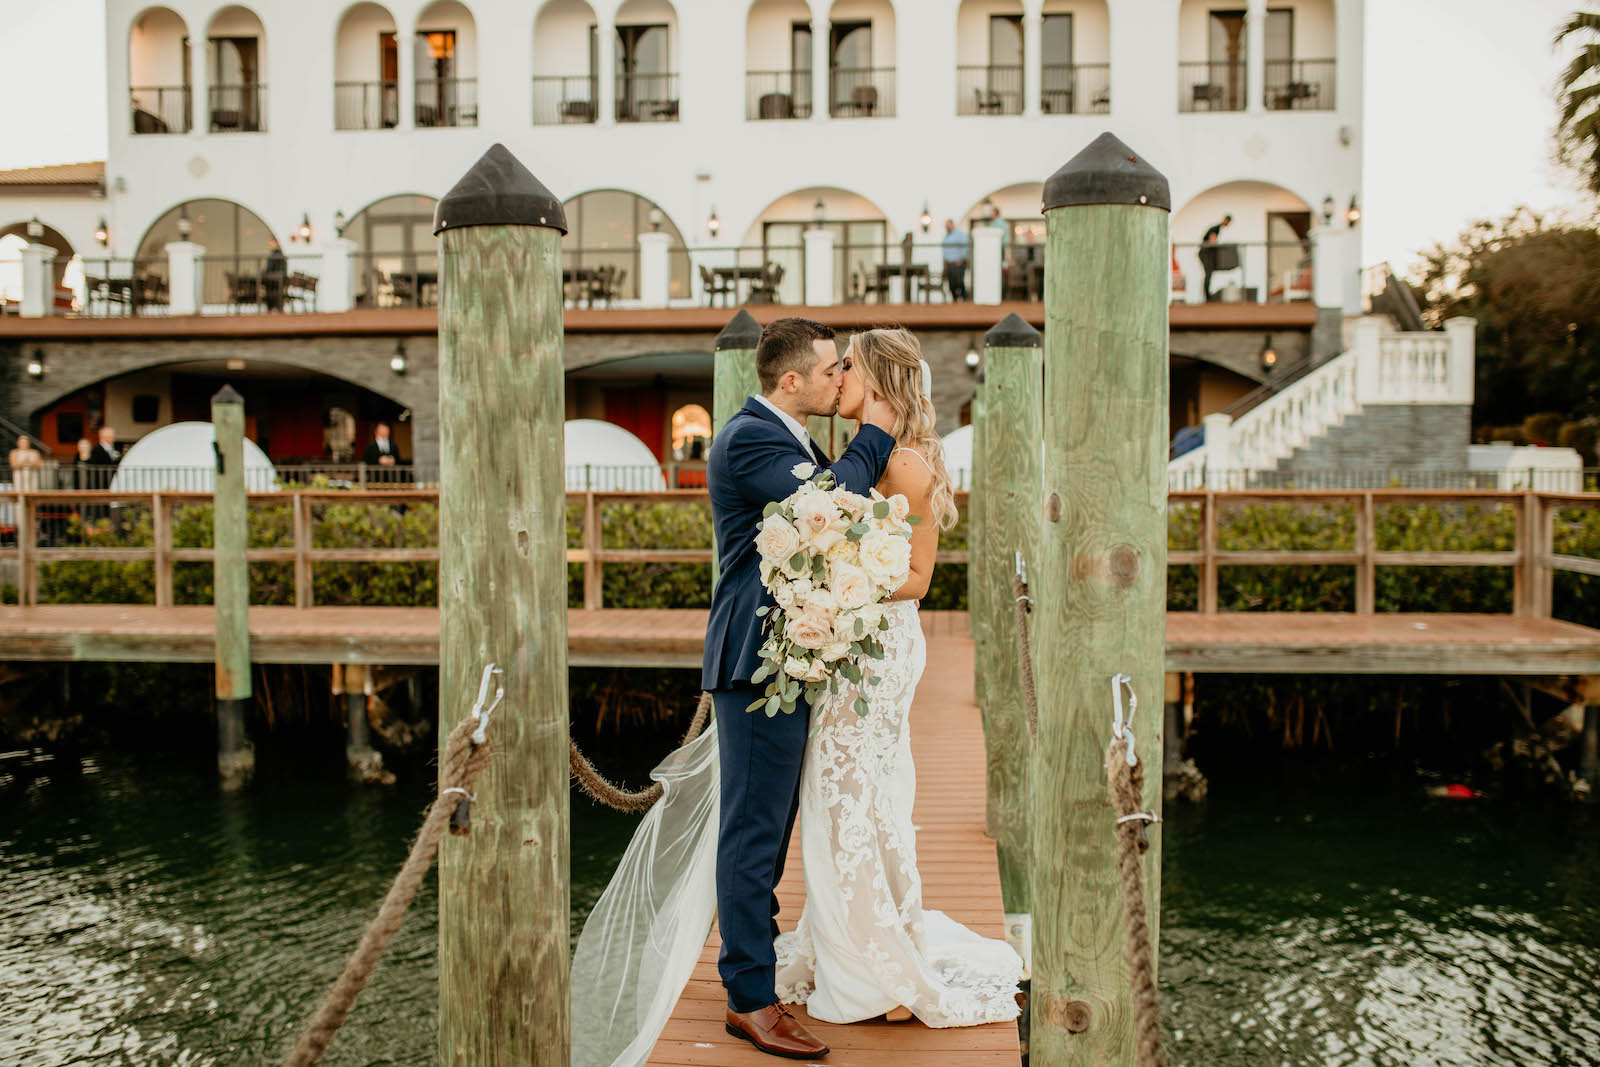 Romantic Intimate Bride and Groom on Waterfront Dock Kissing, Bride Holding Lush White, Ivory and Blush Pink Roses and Eucalyptus Floral Bouquet | St. Pete Boutique Hotel Wedding Venue Hotel Zamora